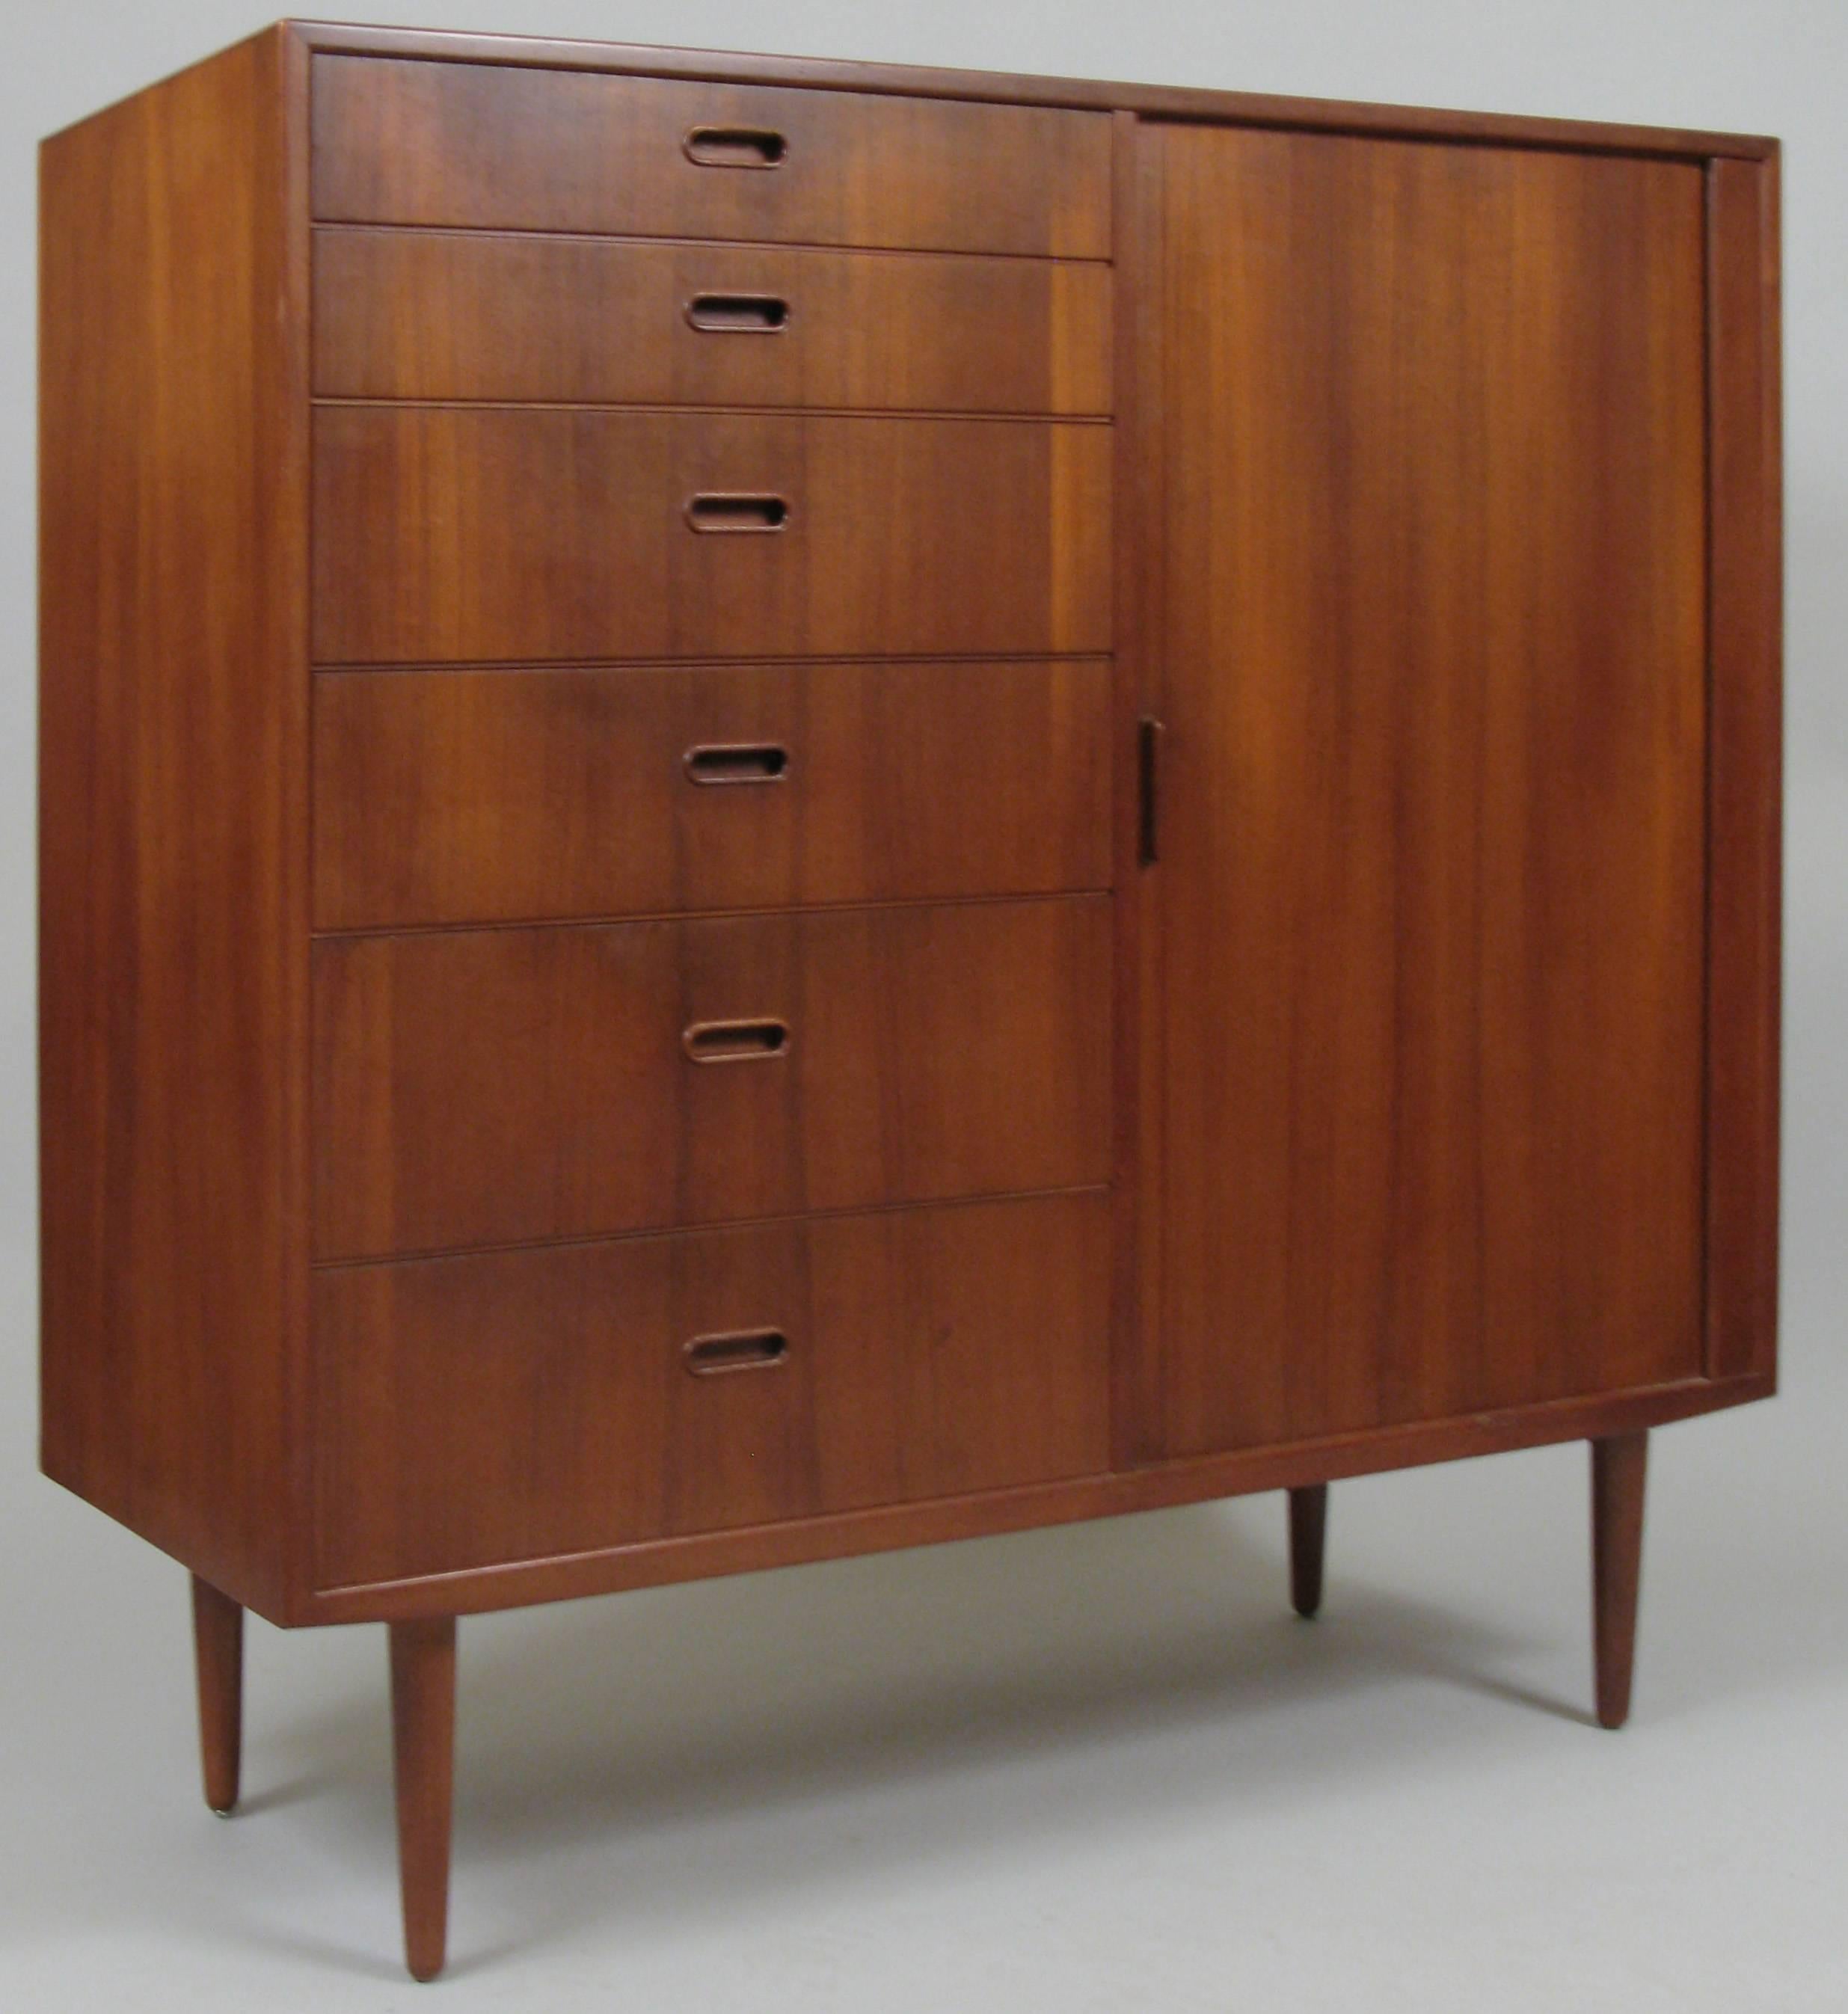 A very handsome vintage Danish teak tall gentlemans chest with a tambour door on the right side of the case concealing six drawers and six graduated drawers on the left side of the case. Beautifully grained teak in this generously scaled storage